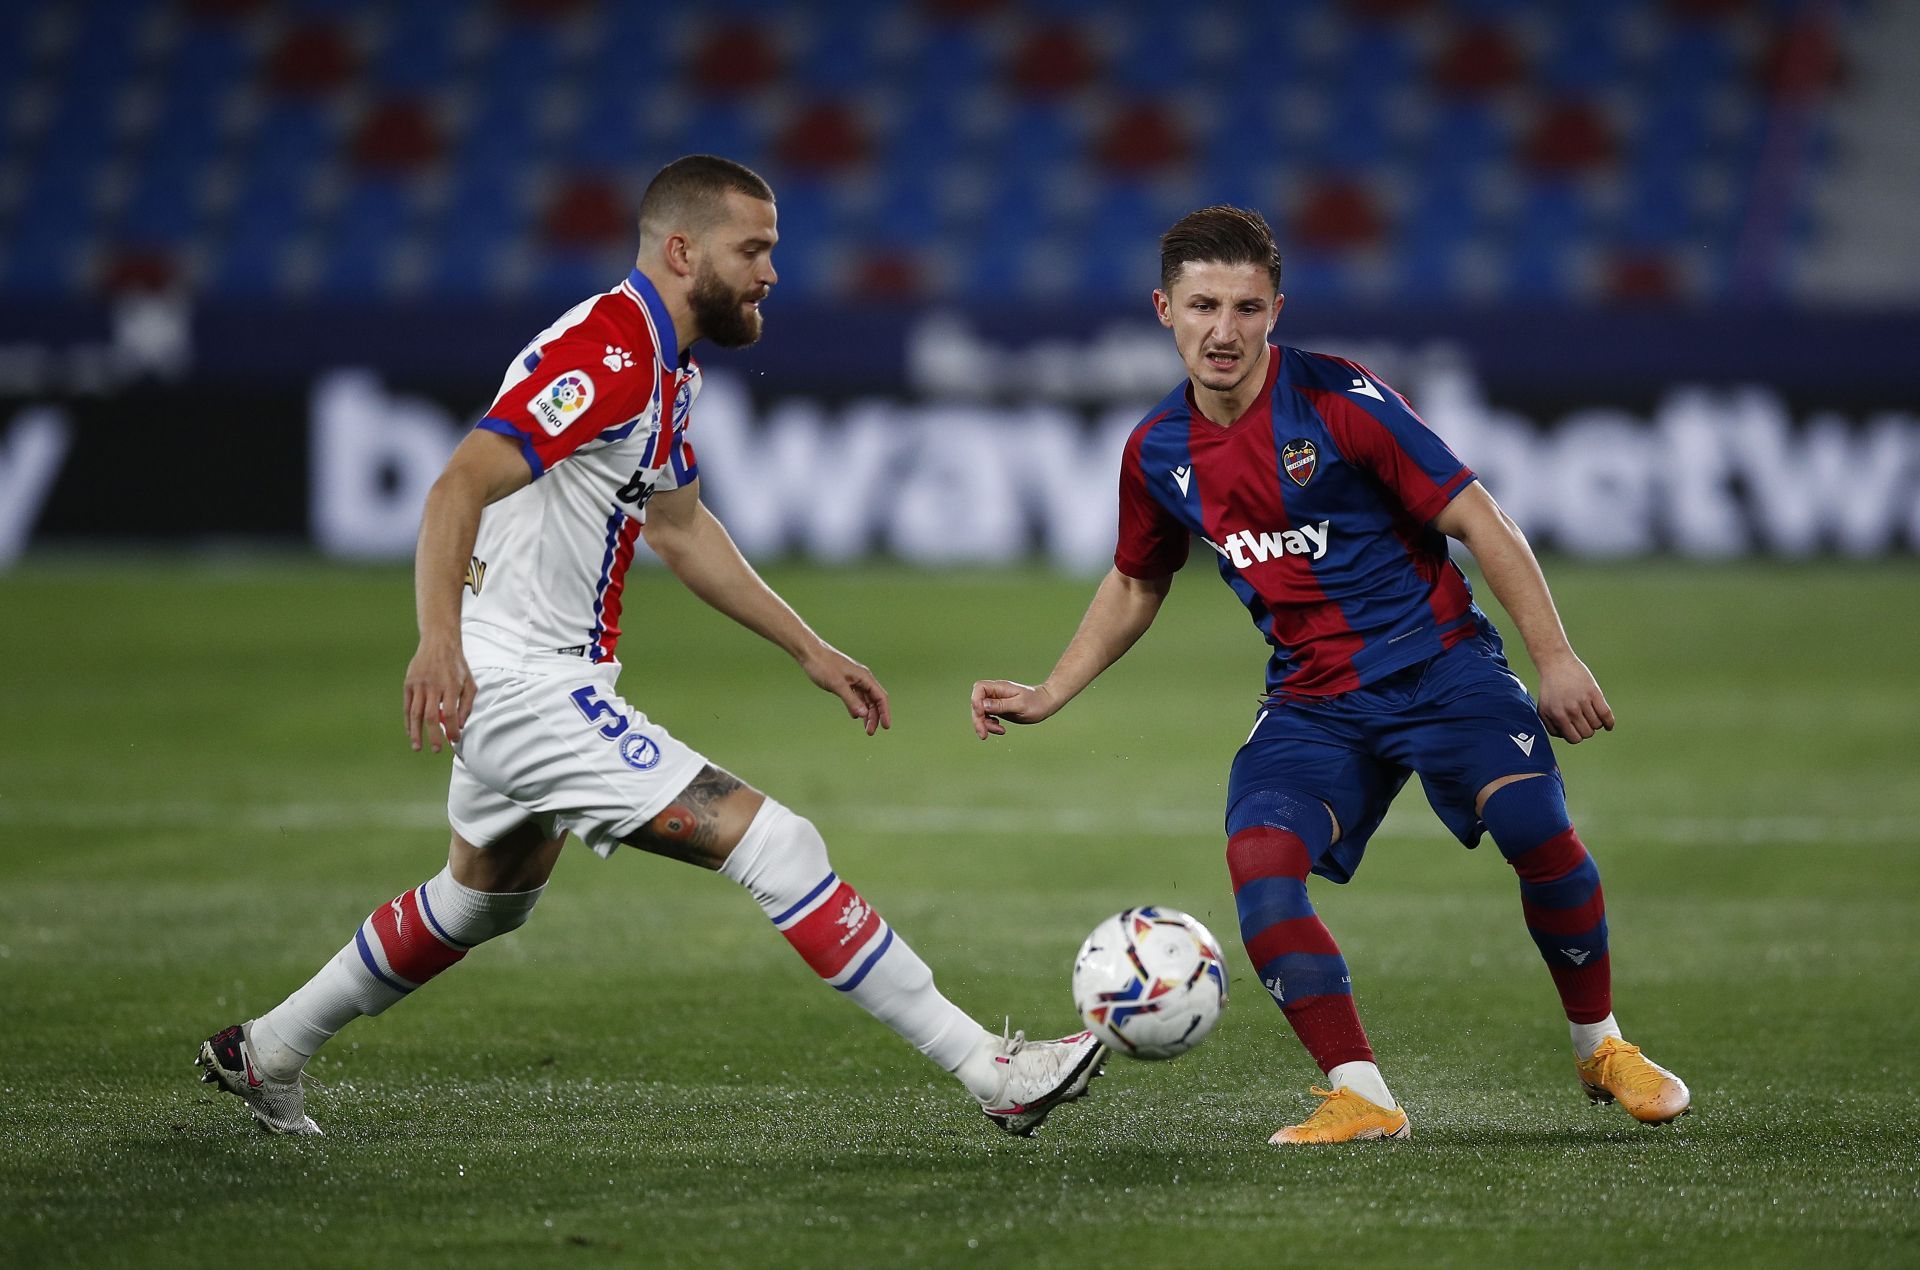 Levante take on Deportivo Alaves this weekend